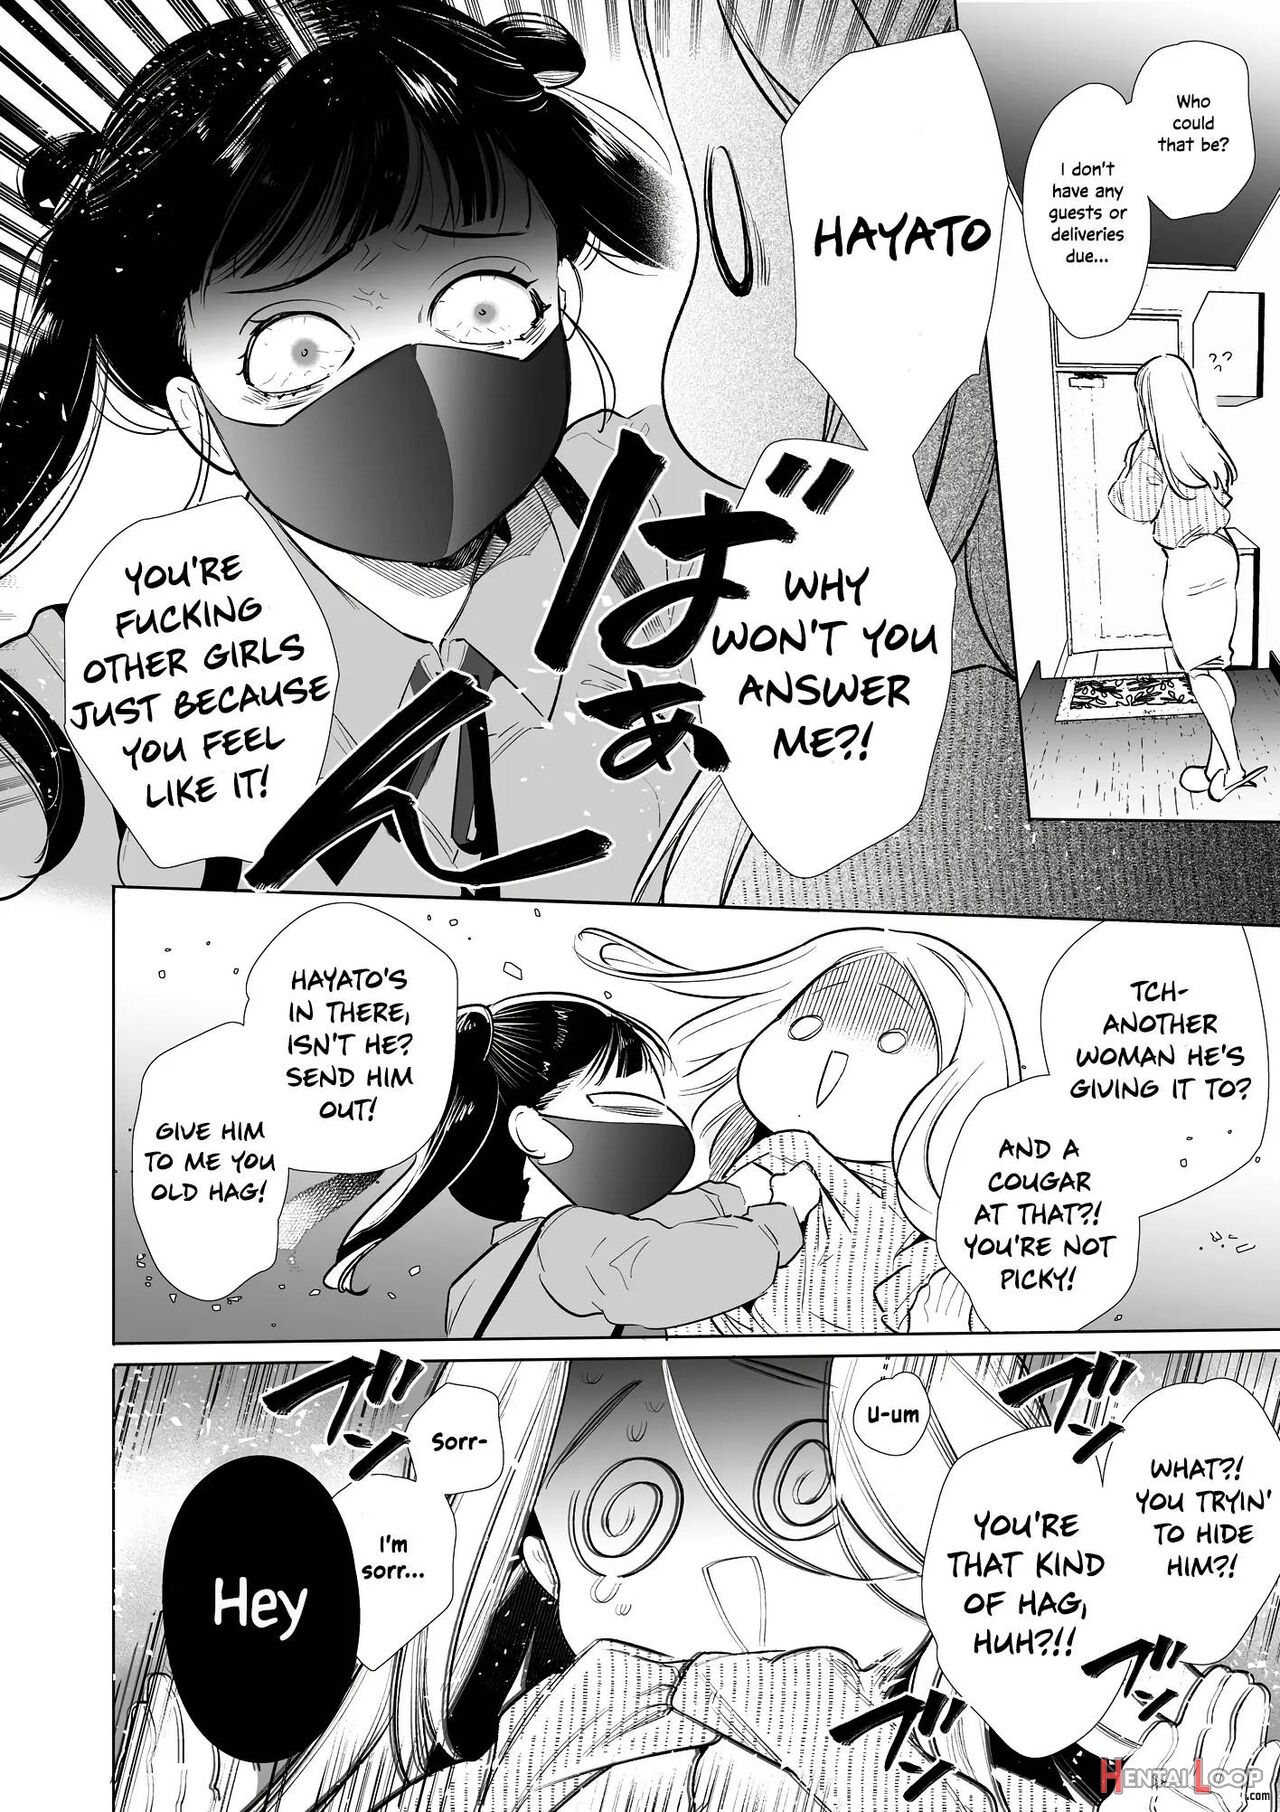 Kana-san Ntr ~ Degradation Of A Housewife By A Guy In An Alter Account ~ page 11